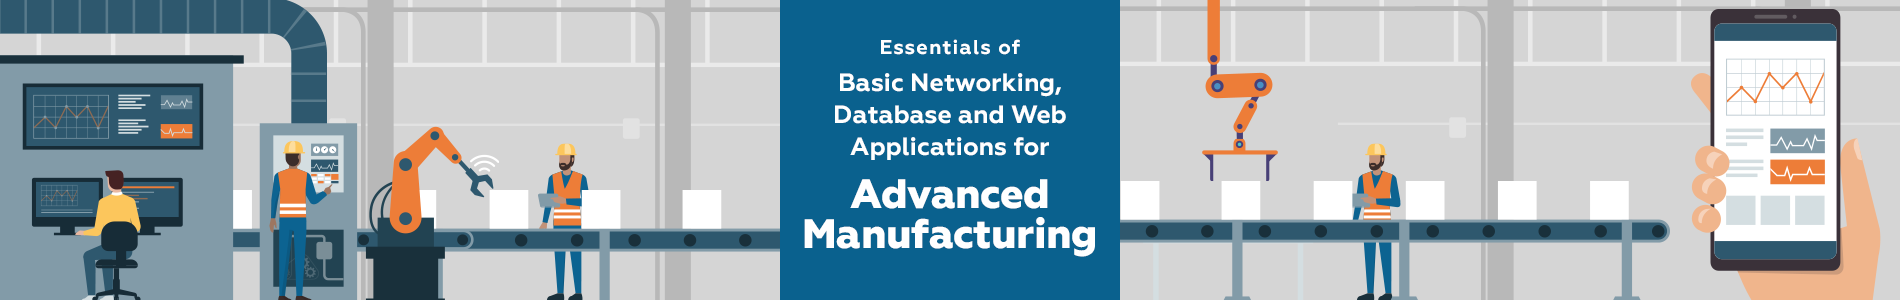 Essentials of Basic Networking Database and Web Applications for Advanced Manufacturing Banner